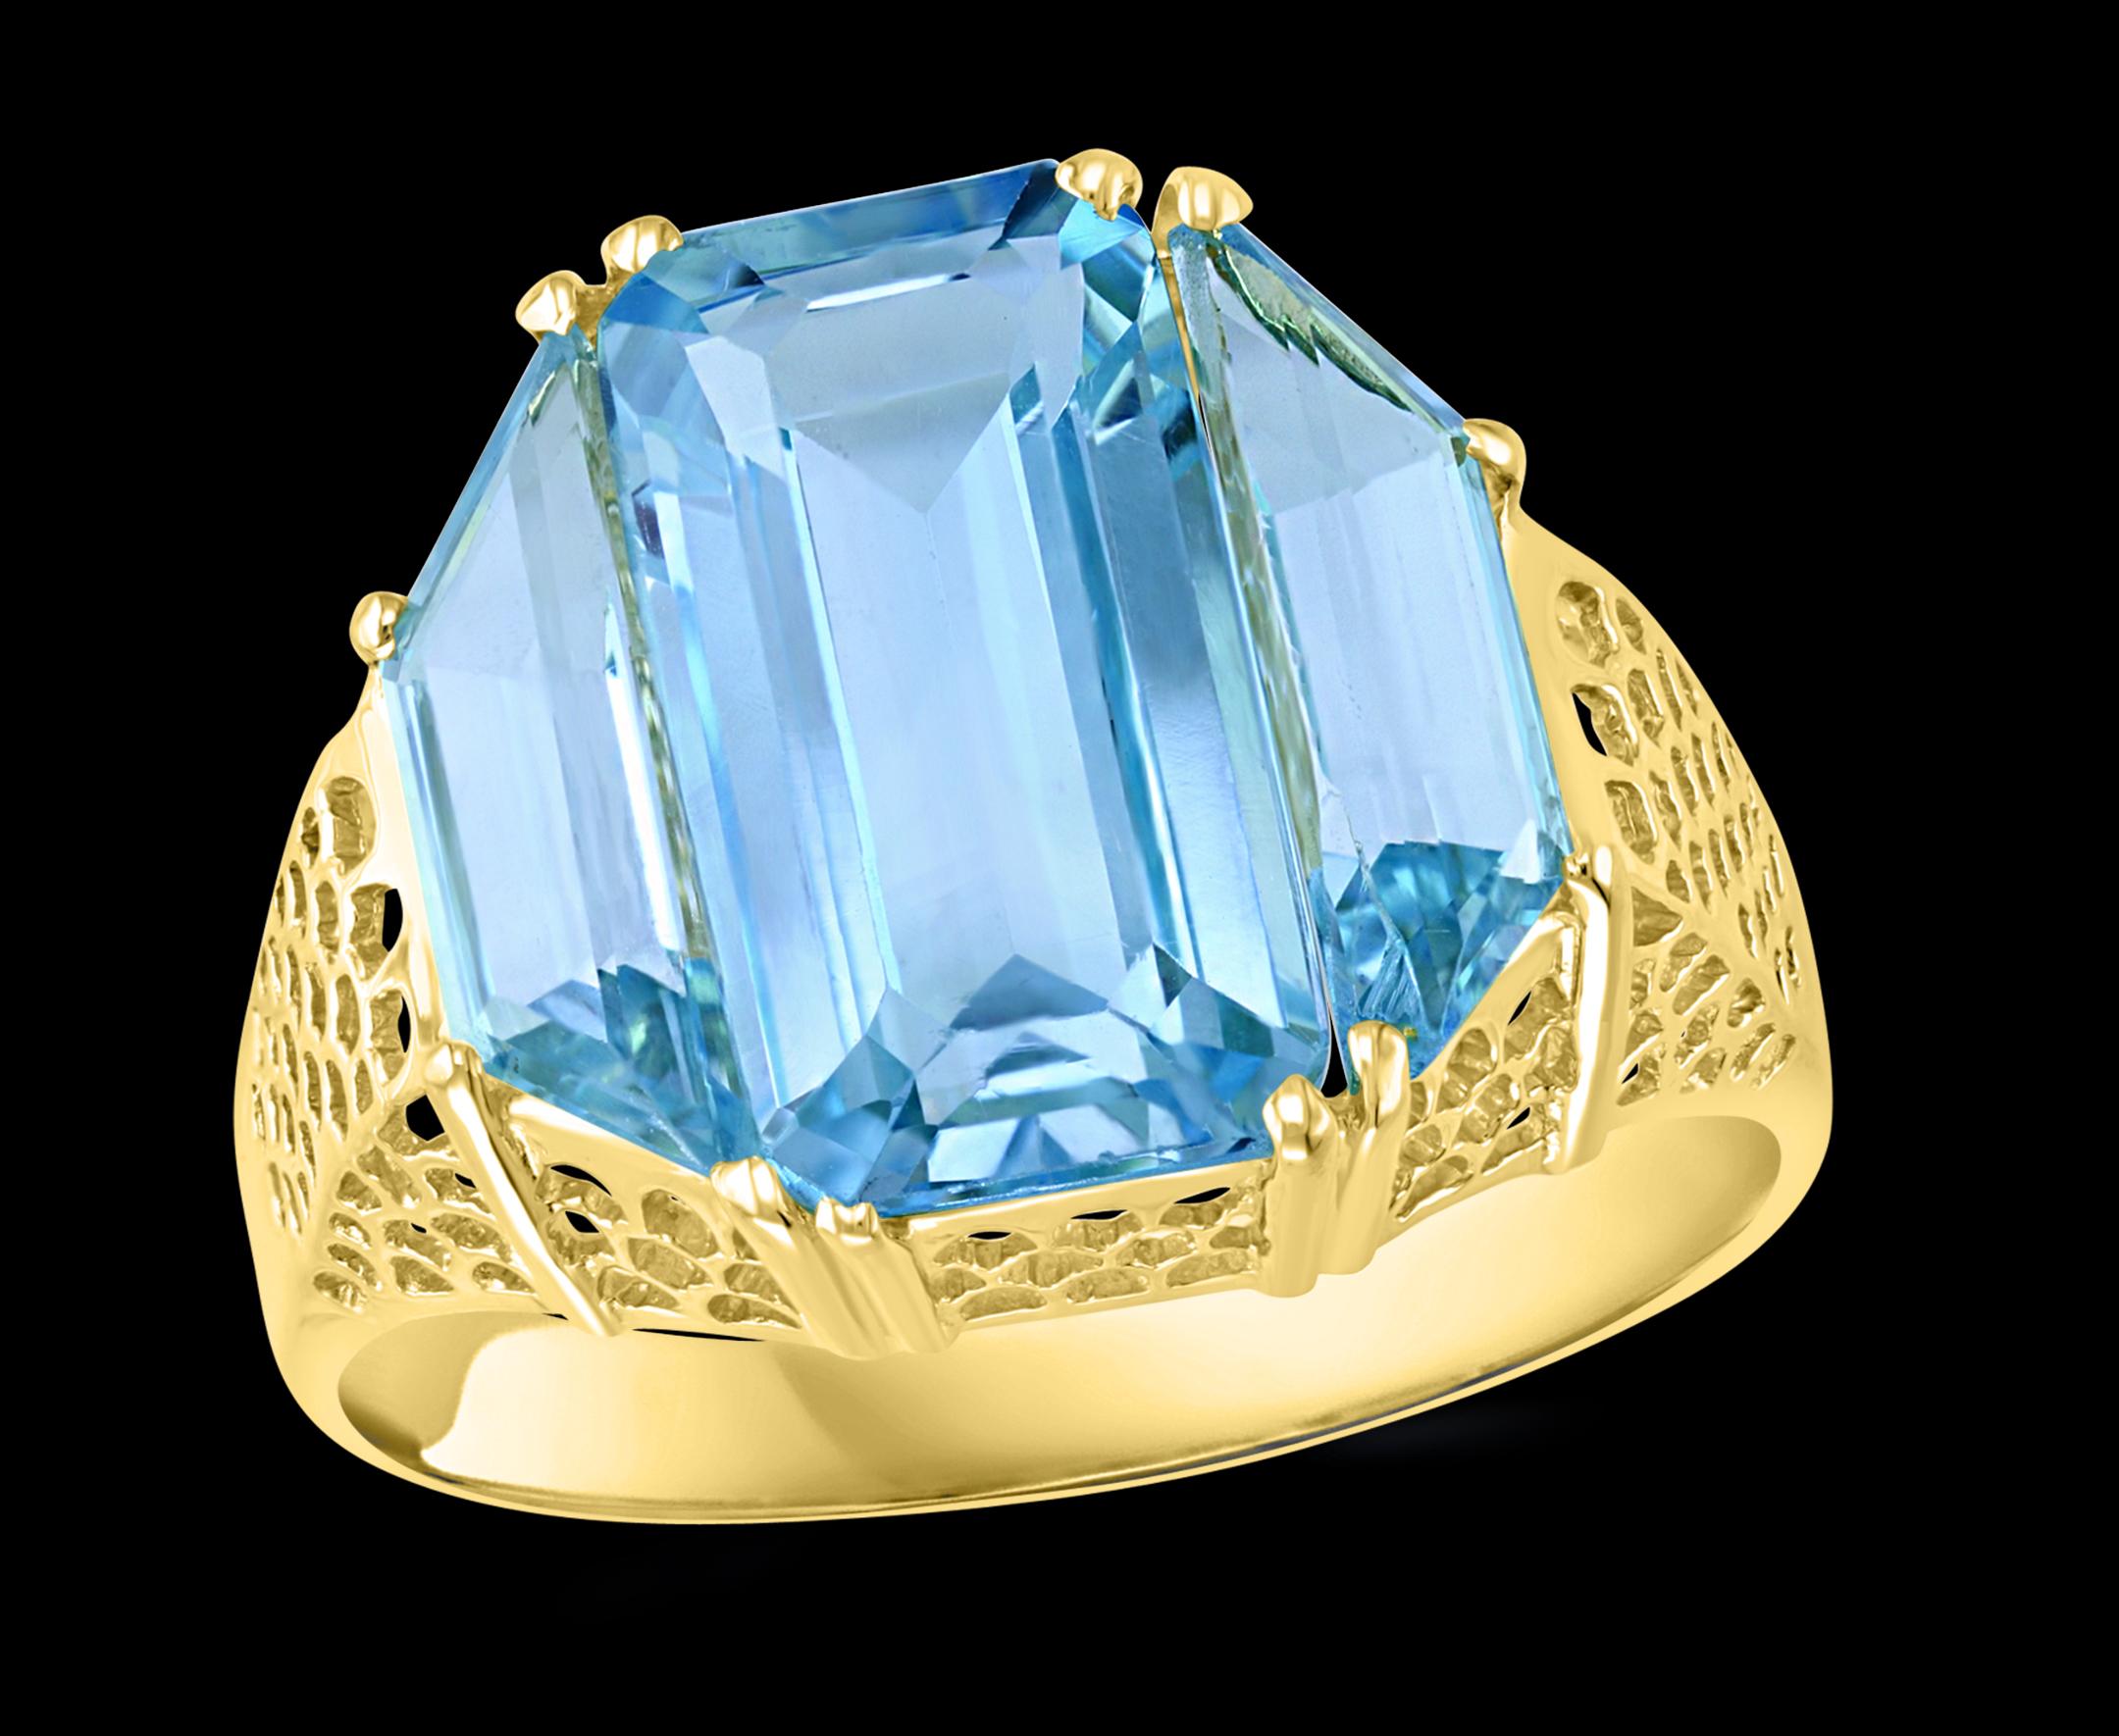 5 Carat Blue Topaz Cocktail Ring 14 Karat Yellow Gold, Estate Size 9
A classic, Cocktail ring 
Huge Approximately  5 Carat of   Blue Topaz  Good Quality ,Emerald cut shape , full of luster and shine but light in color .
Please look at all the